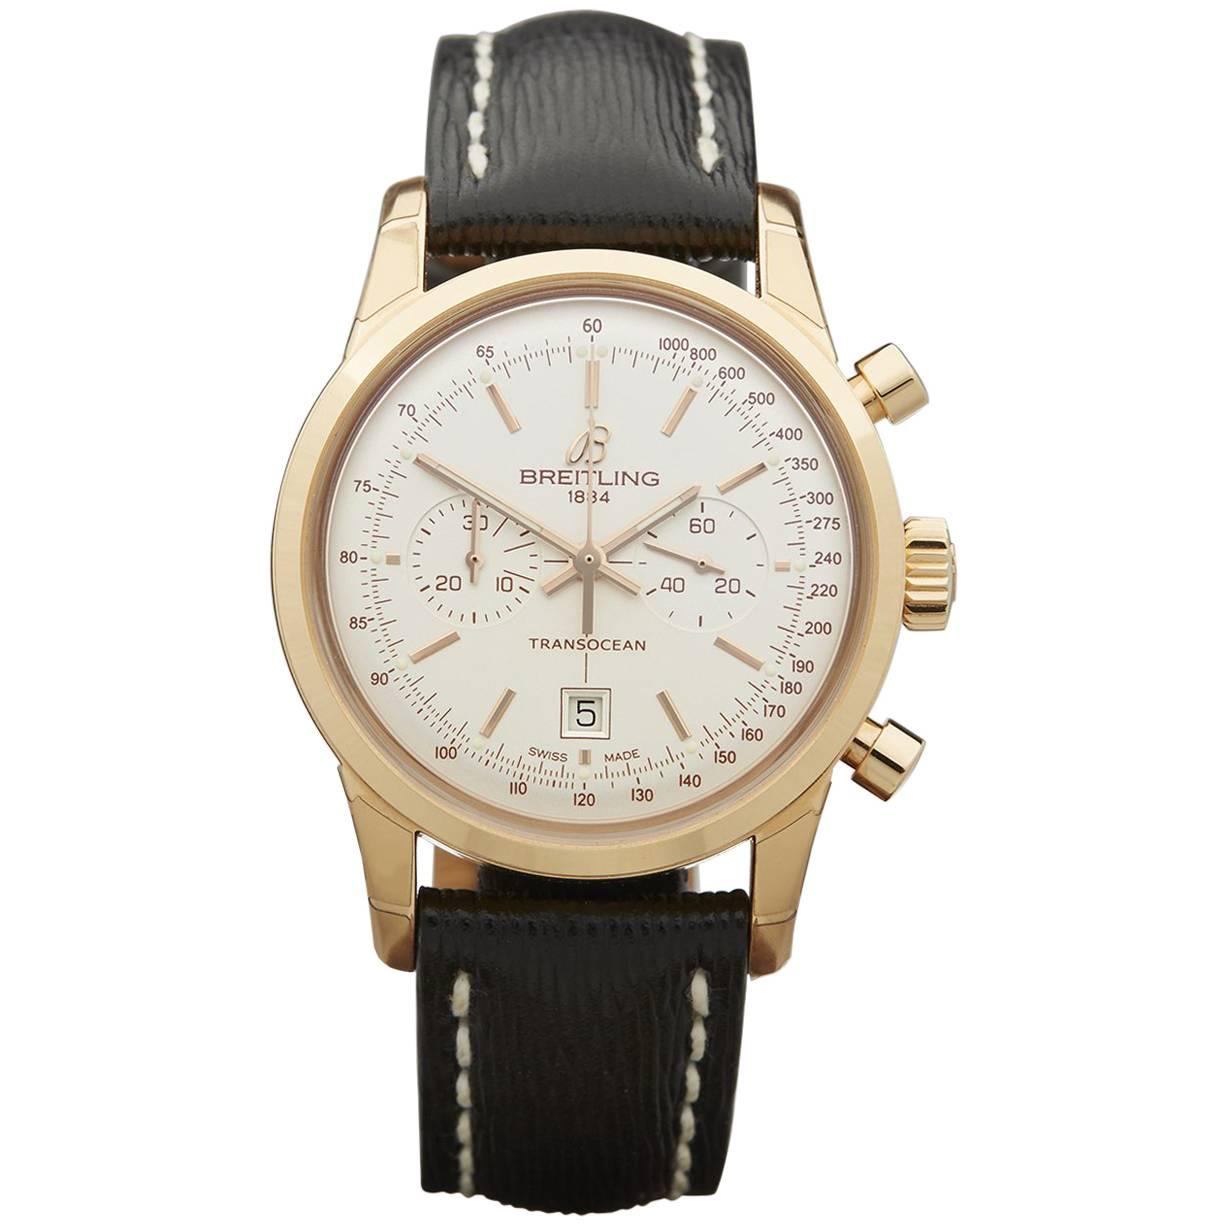 Breitling Rose Gold Transocean Chronograph Automatic Wristwatch